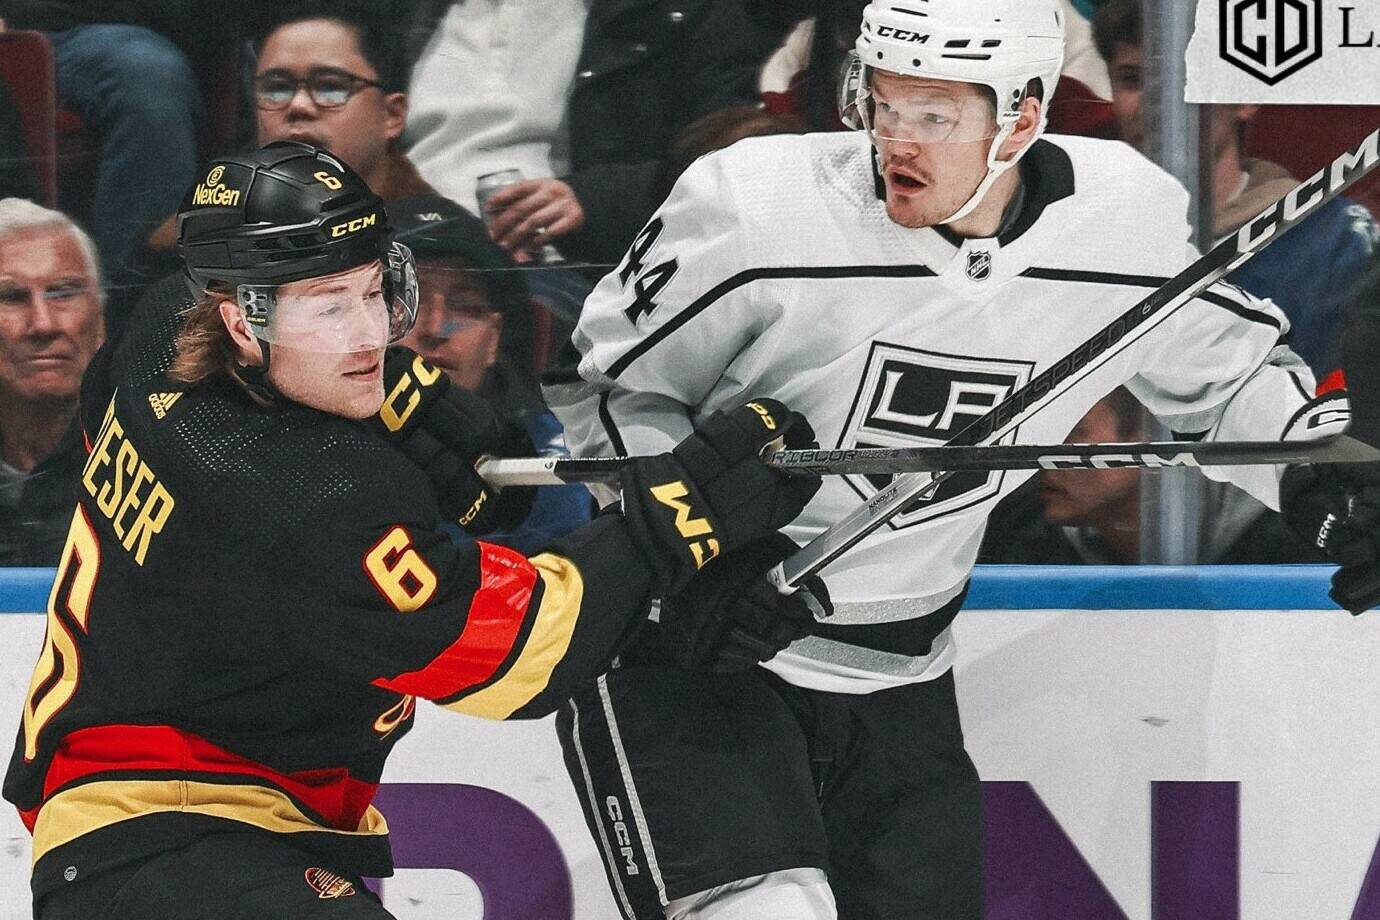 Vancouver’s Brock Boeser and Los Angeles’ Mikey Anderson battle for a puck in Monday night’s game at Rogers Arena. The Kings defeated the Canucks 3-2. Los Angeles Kings photo